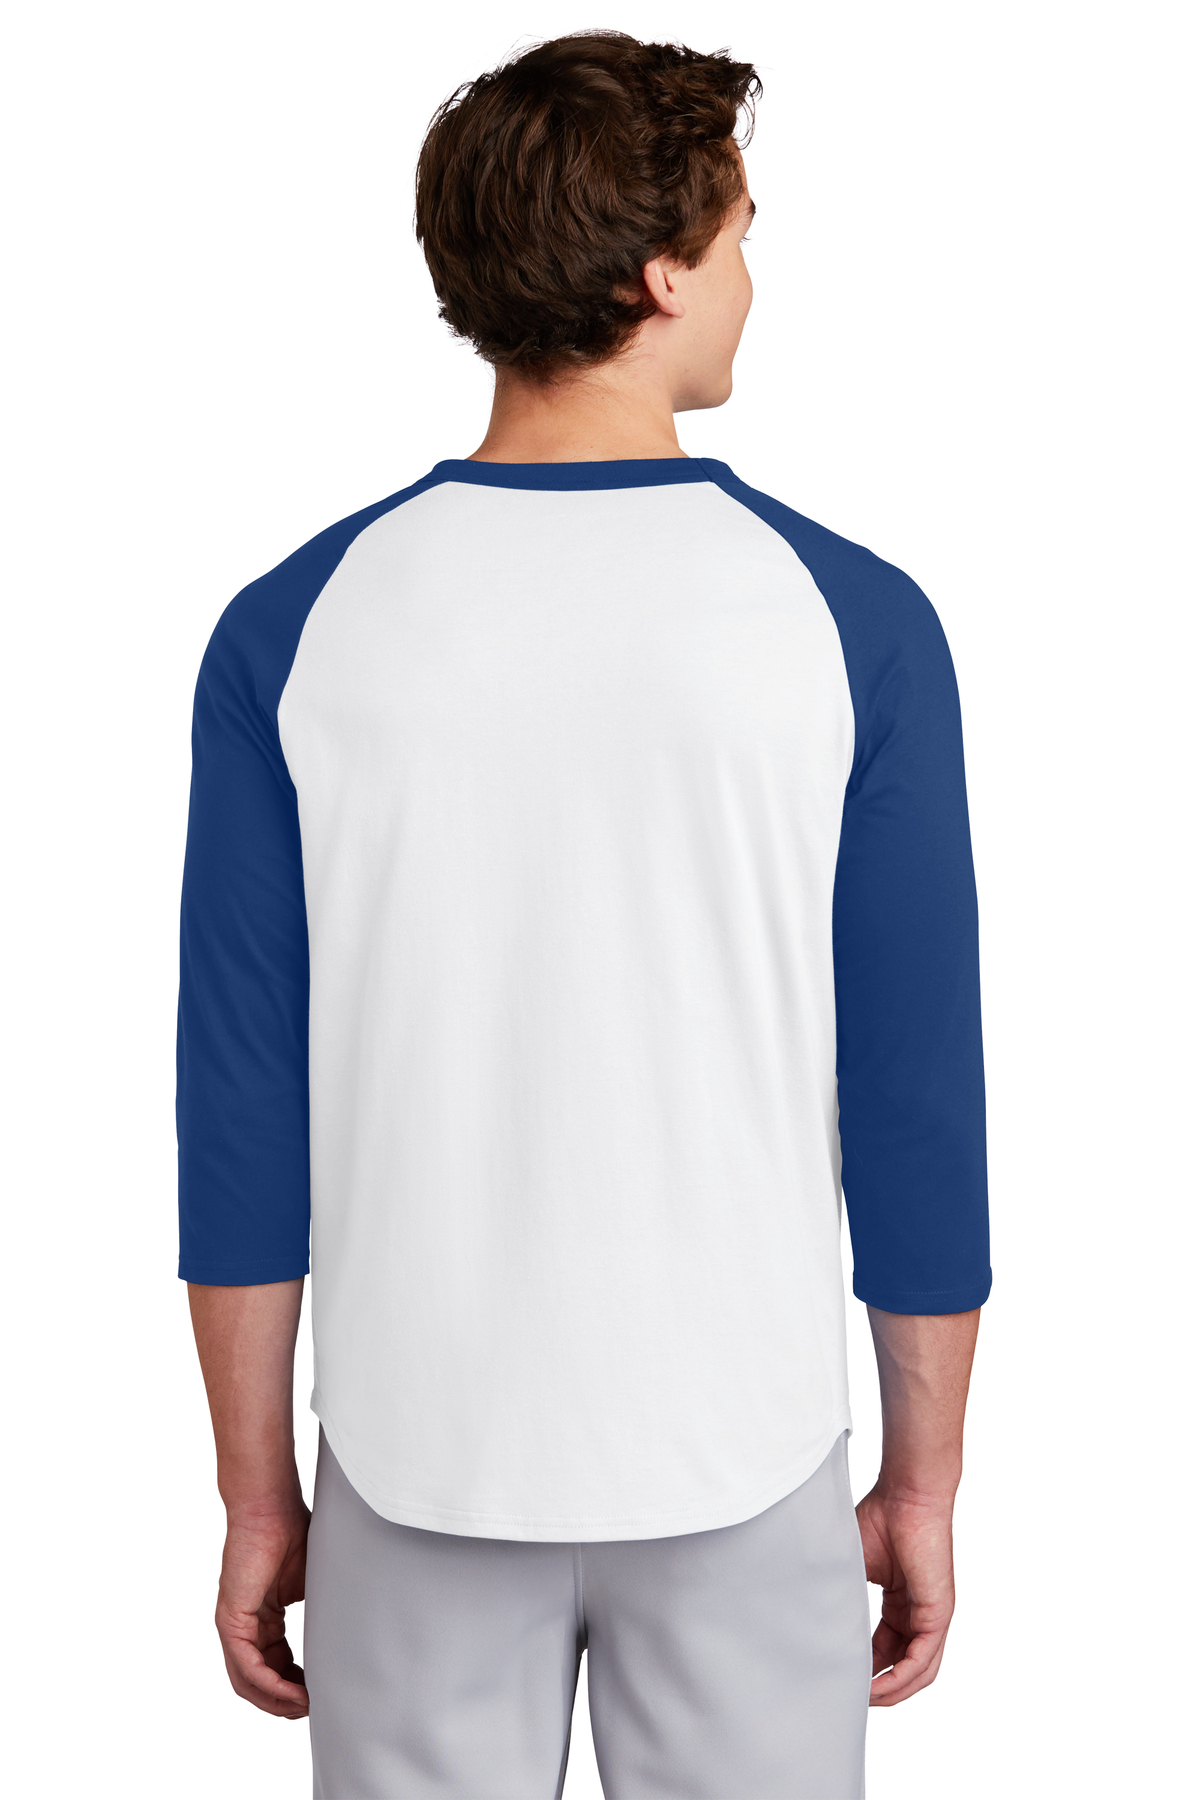 Details about   Mens CONTRAST RAGLAN T Shirts Short Sleeve Athletic Jersey Casual Basic Gym